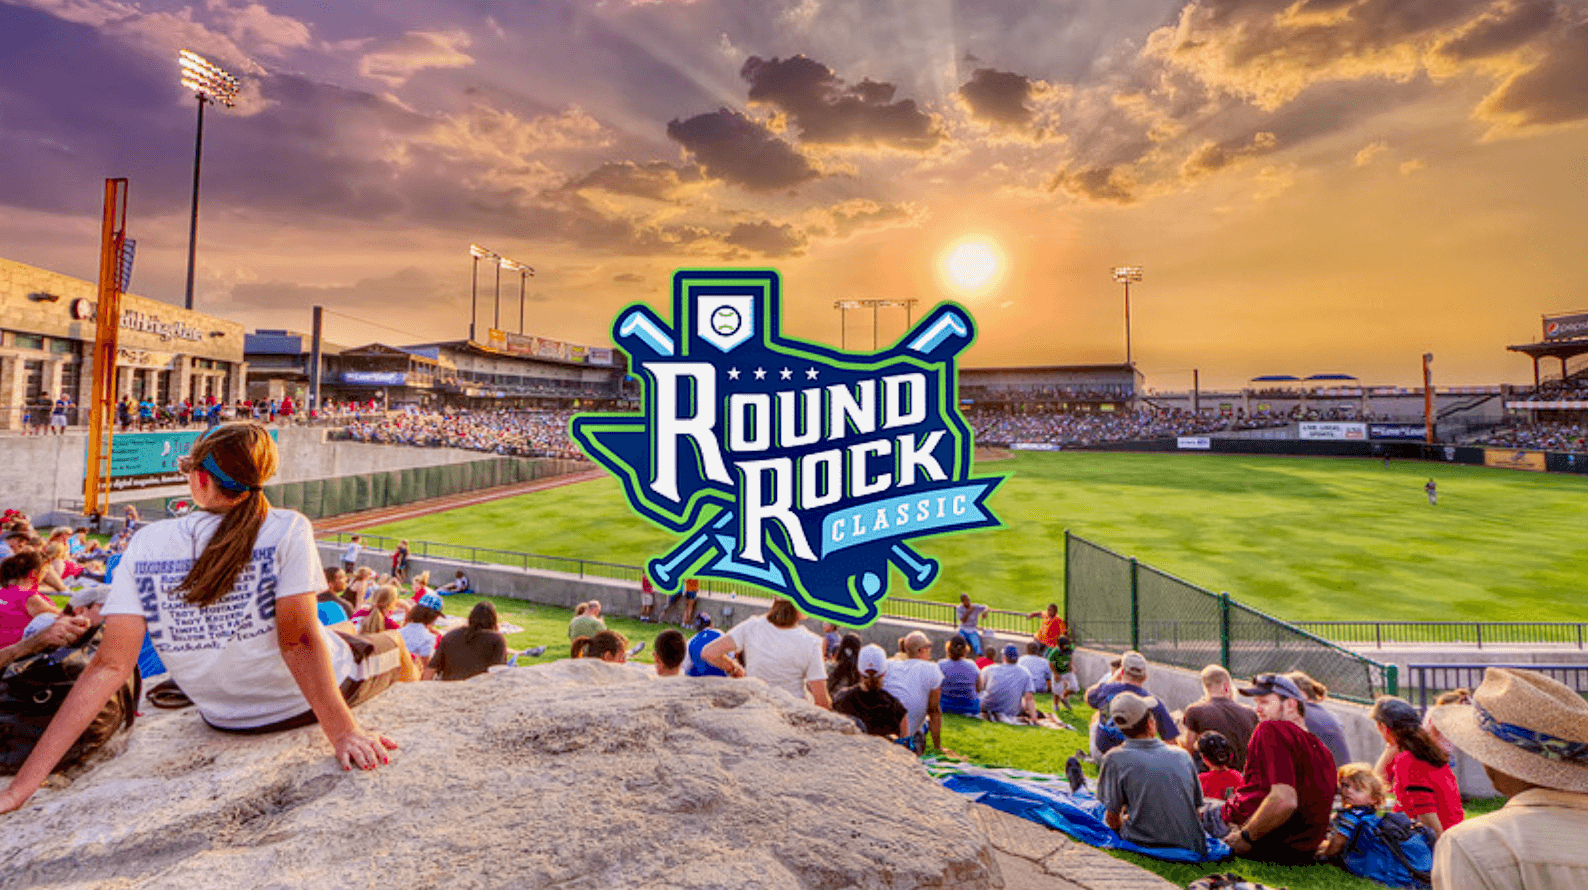 Round Rock Classic returns to Dell Diamond with loaded lineup in 2022